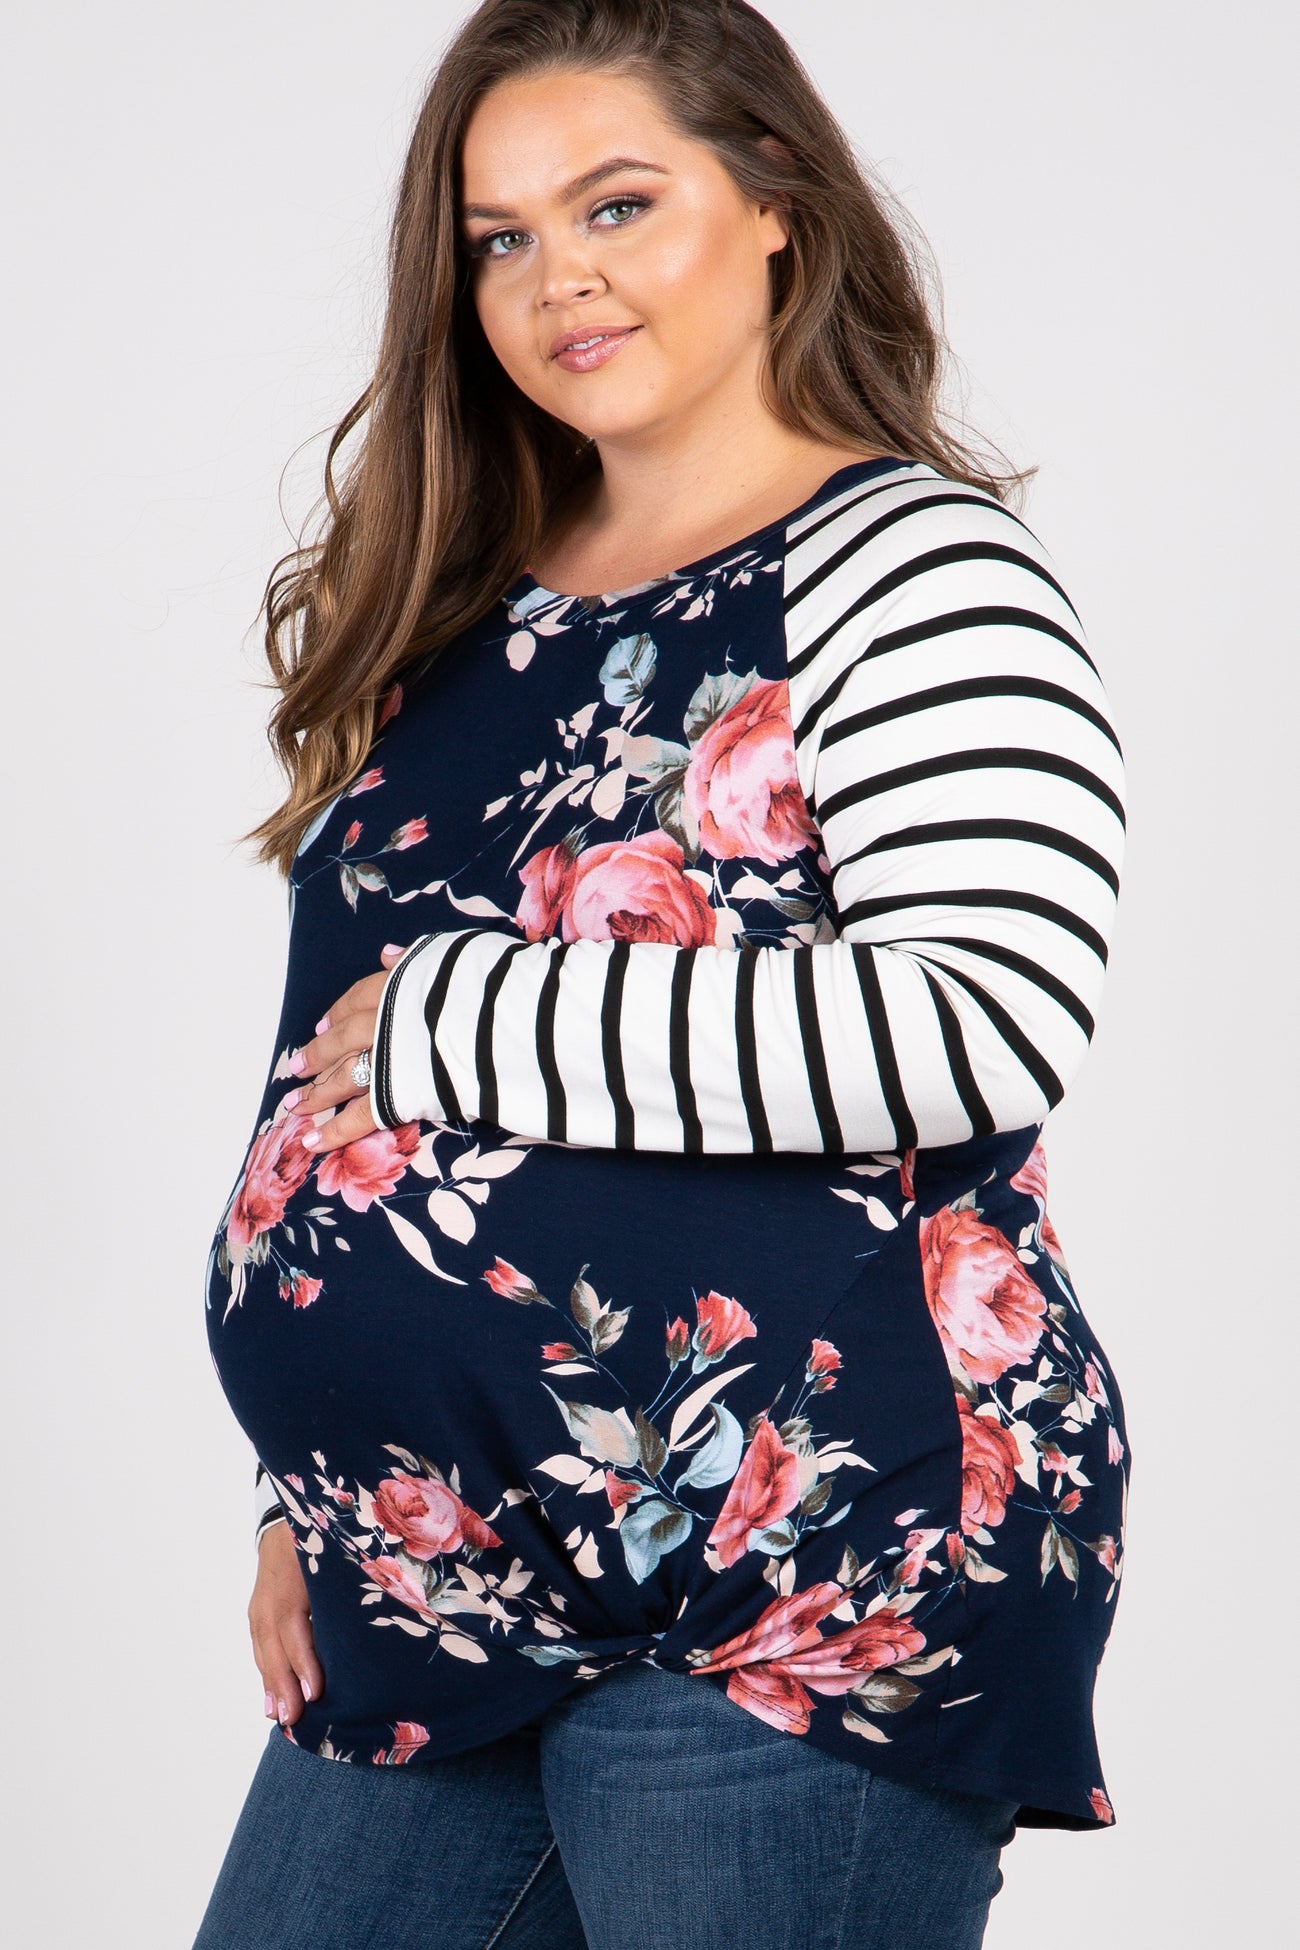 Navy Blue Floral Striped Sleeve Maternity Knot Plus Top– PinkBlush